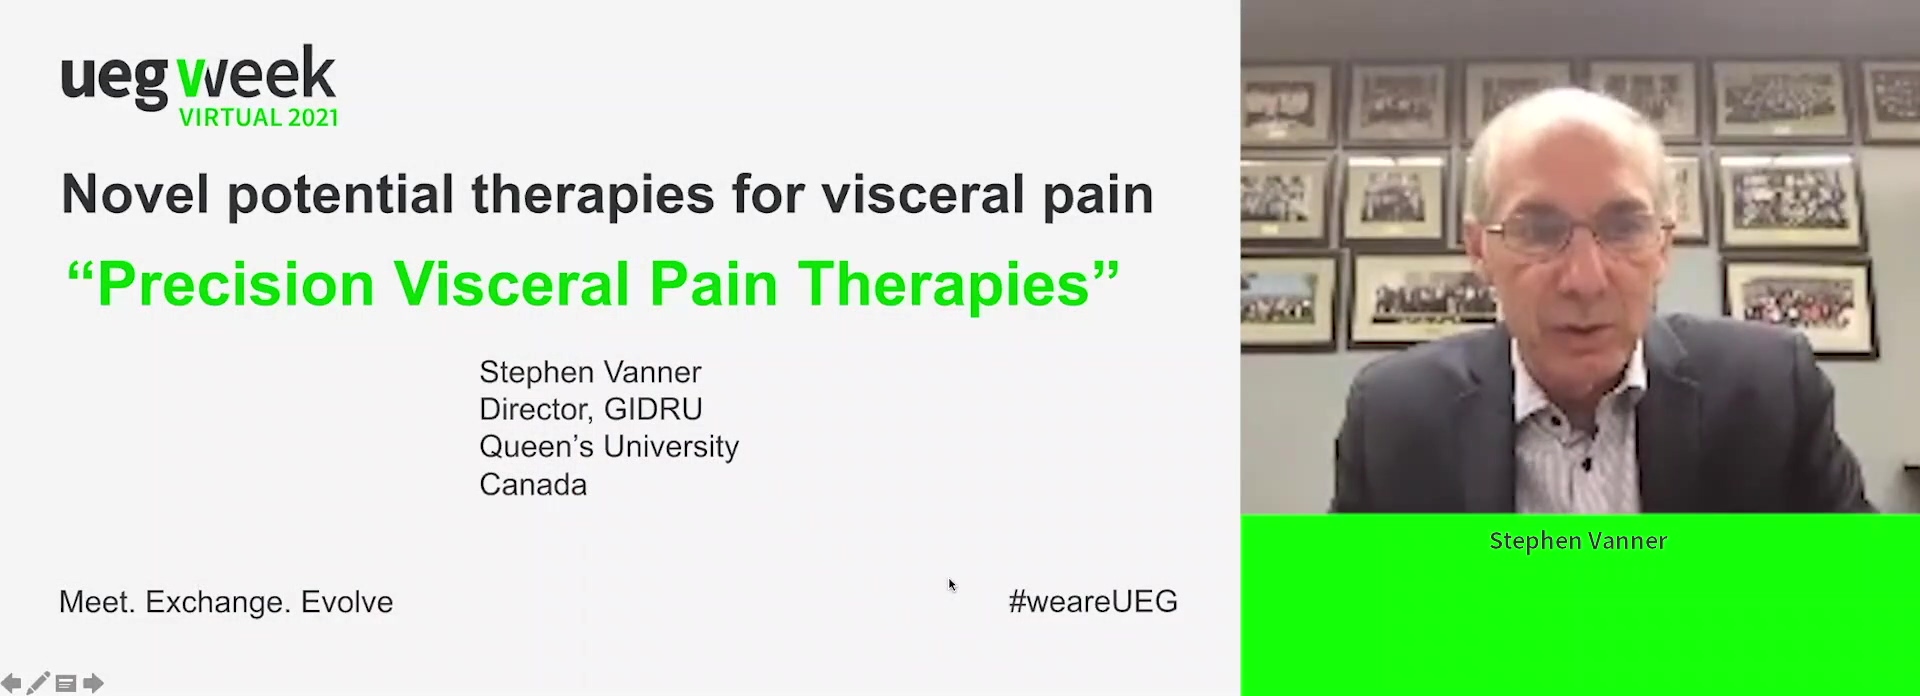 Novel potential therapies for visceral pain